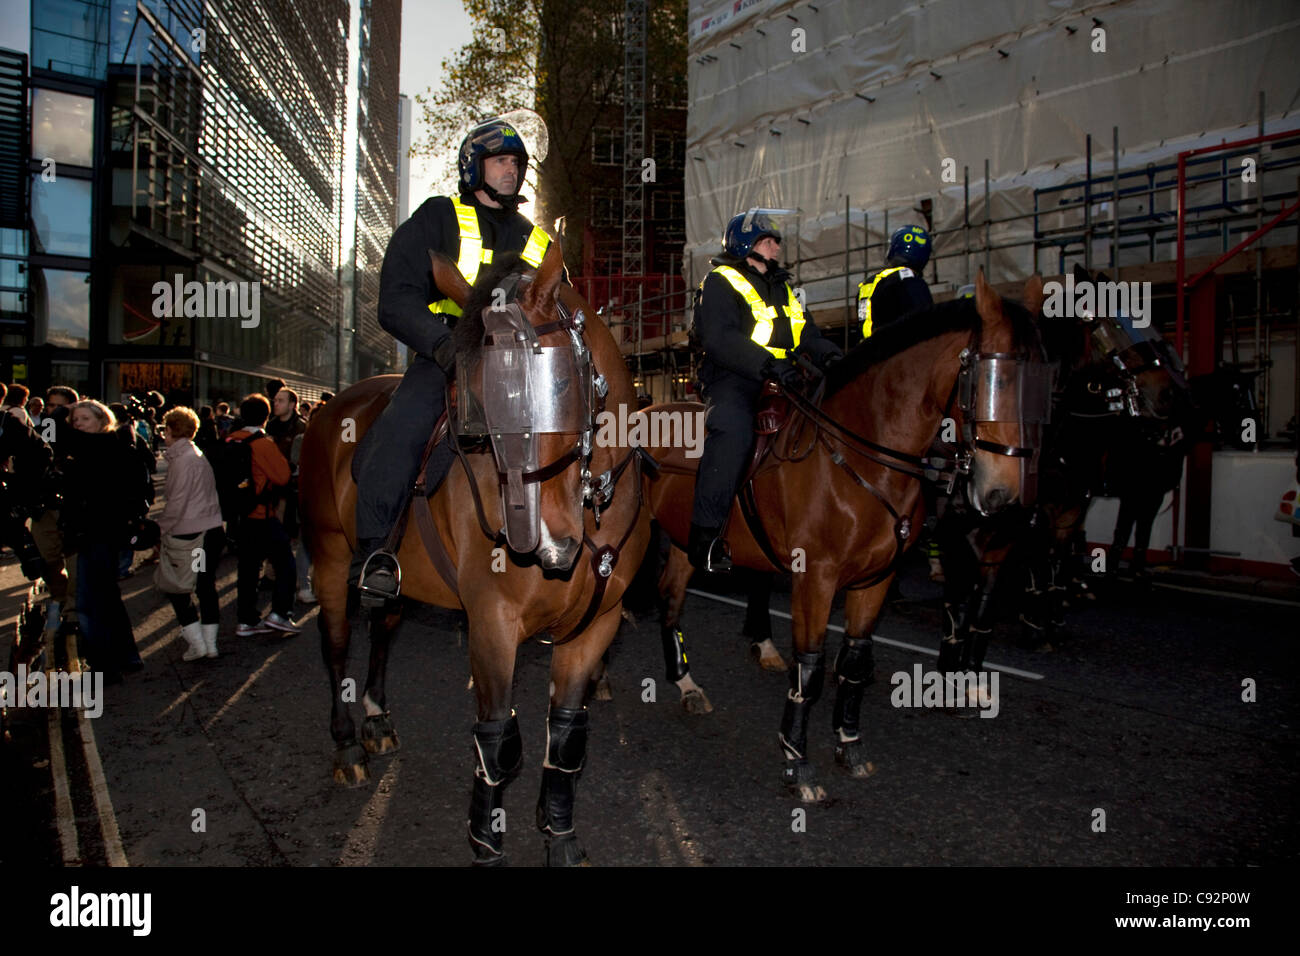 Police Horses High Resolution Stock Photography and Images - Alamy